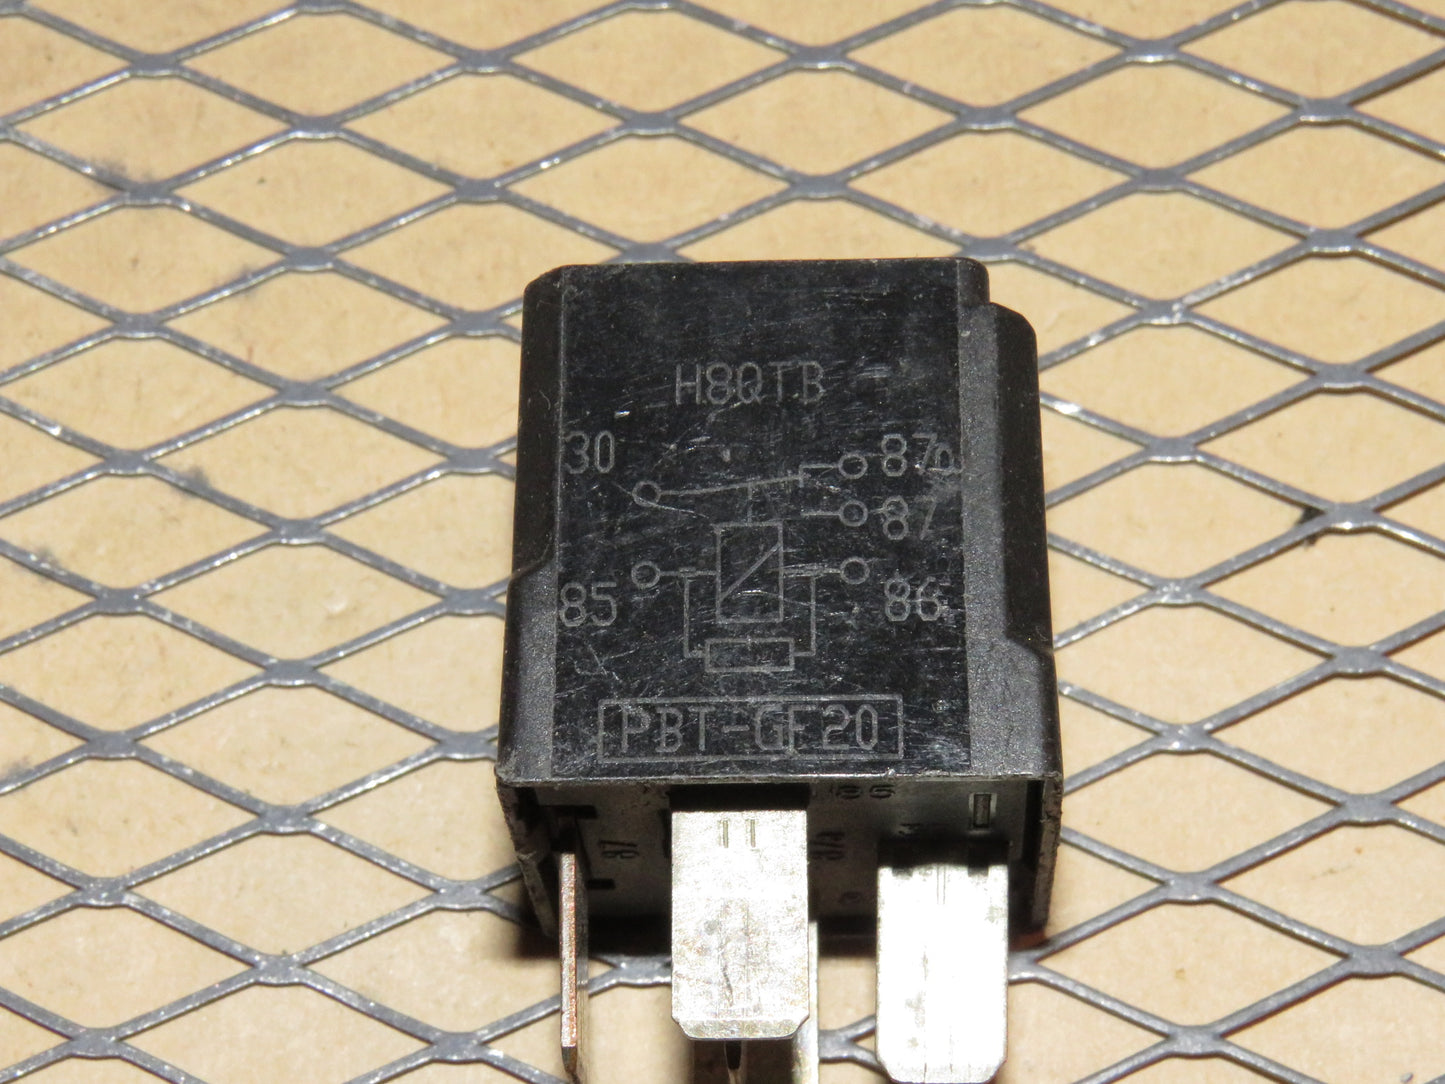 Ford Relay F0AB-14B192-AA